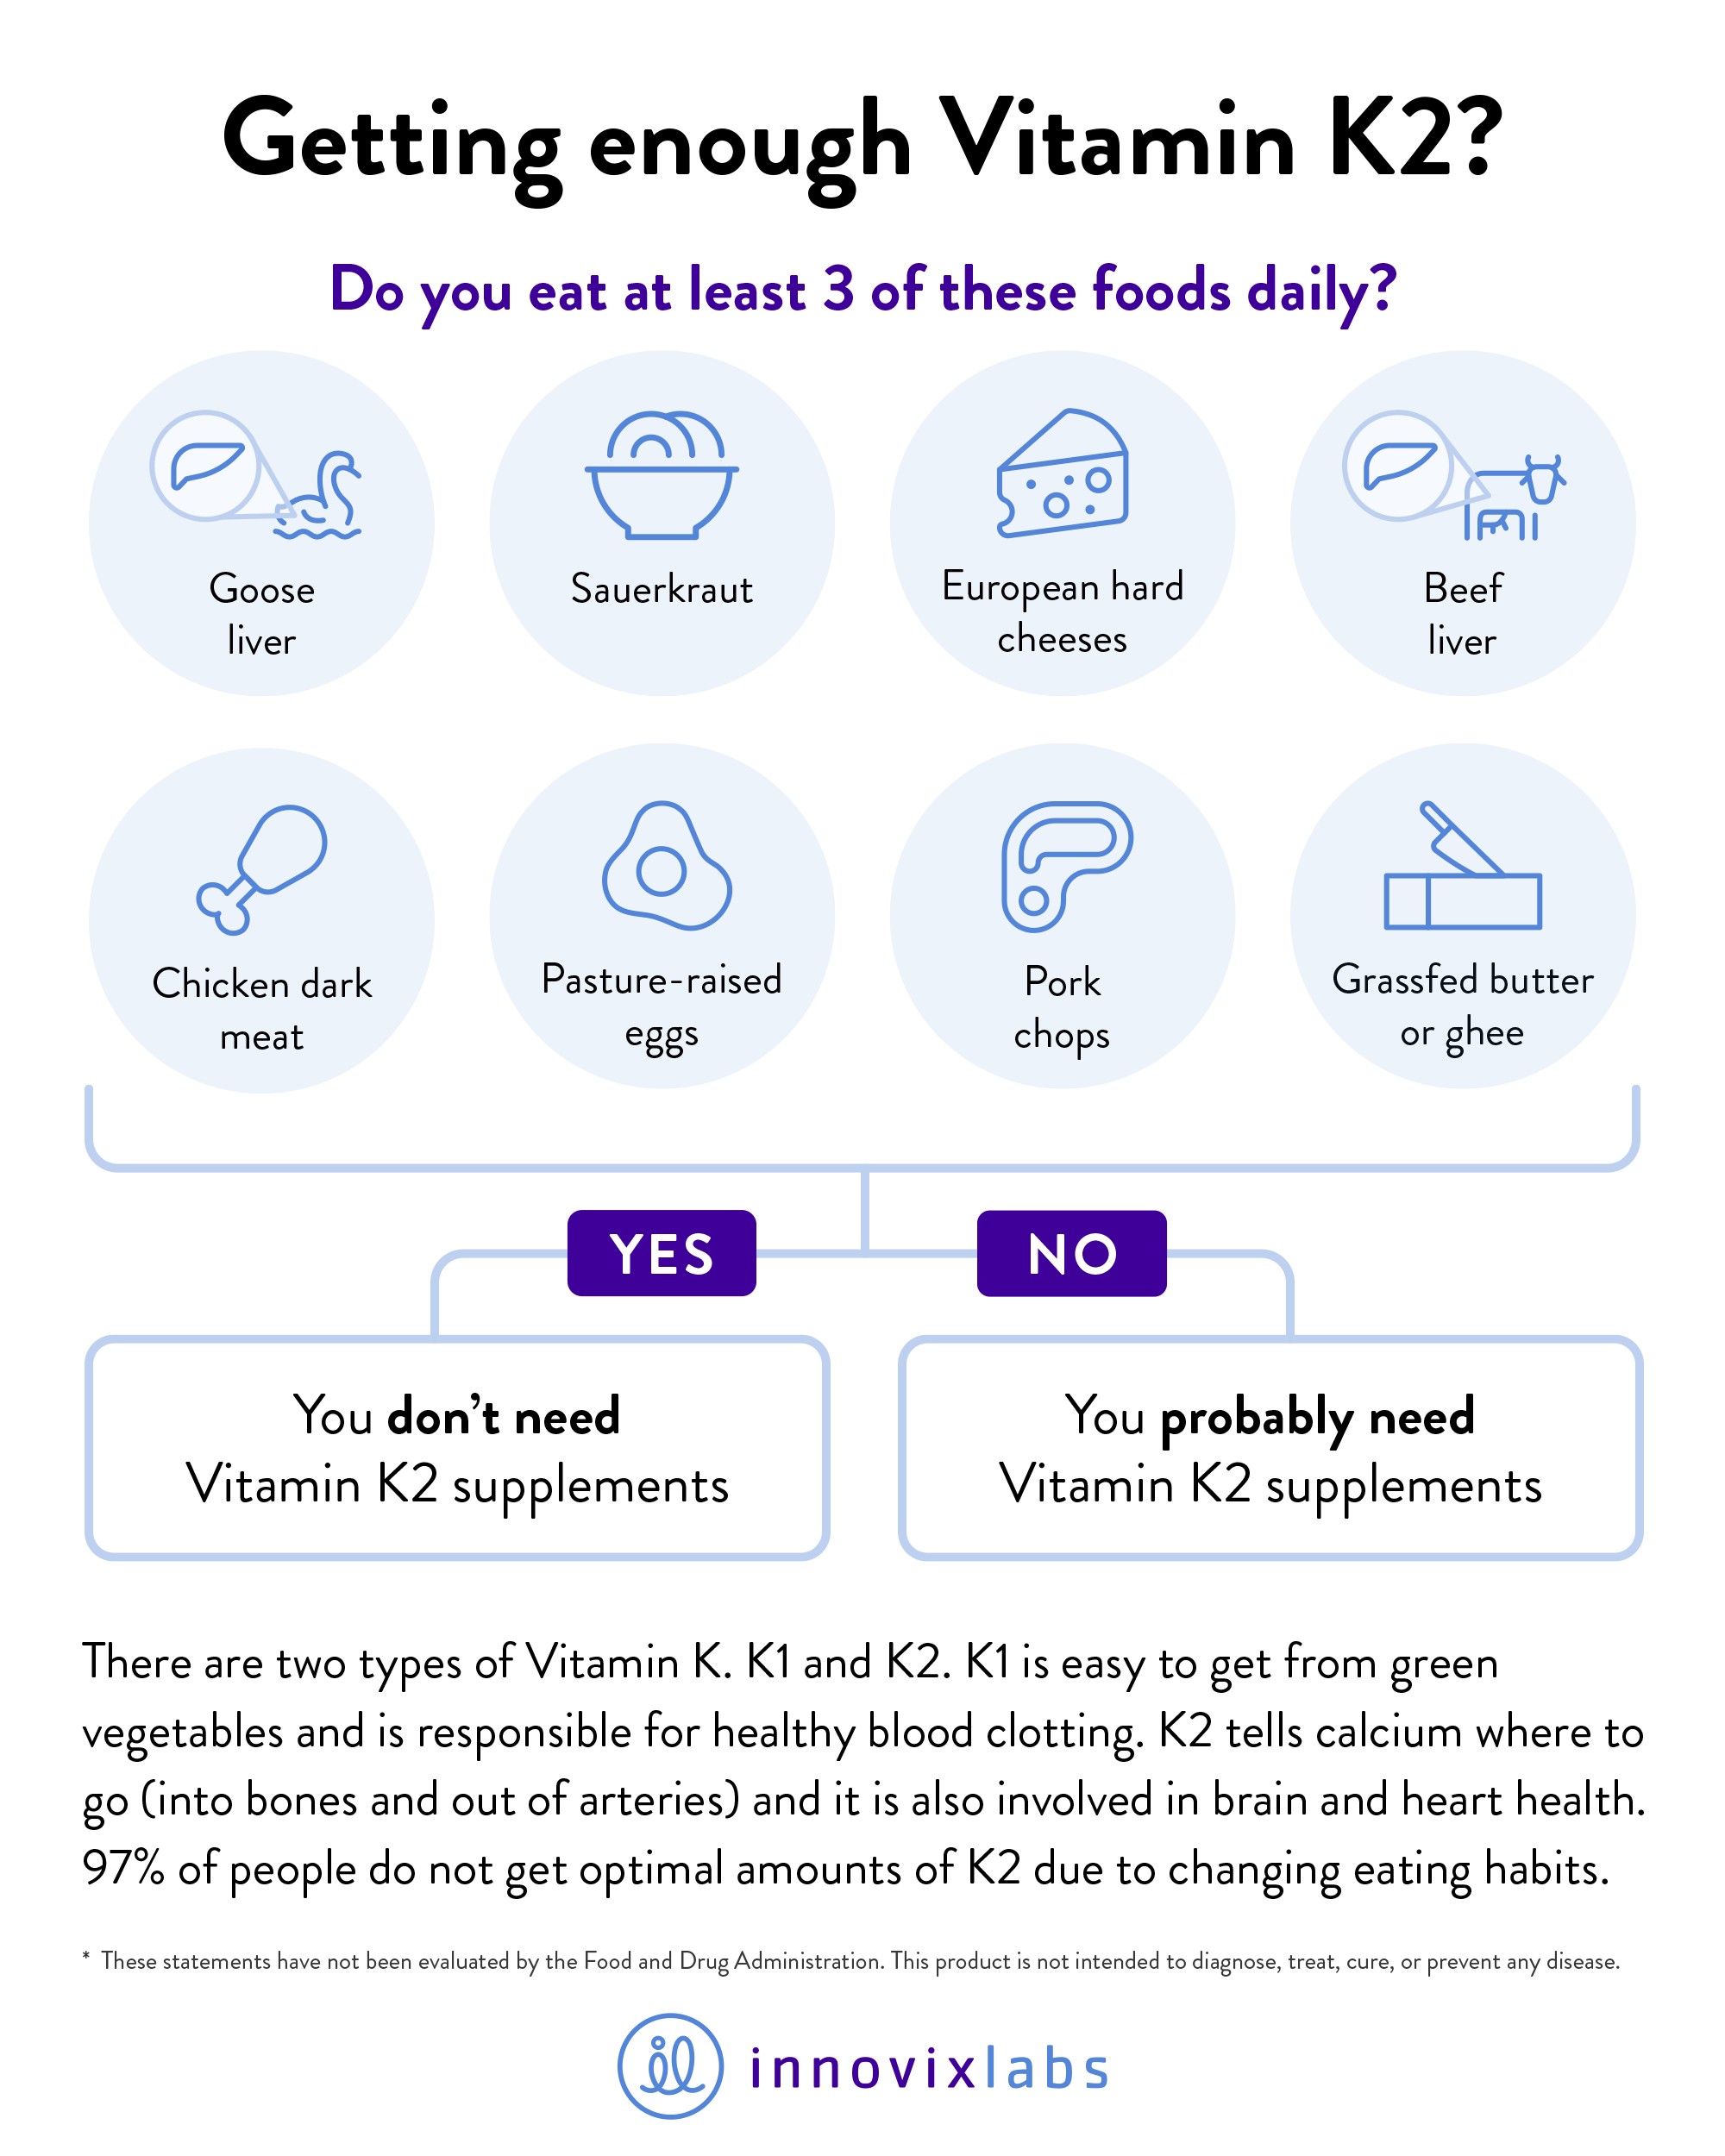 Graphic explaining if you are getting enough Vitamin K2